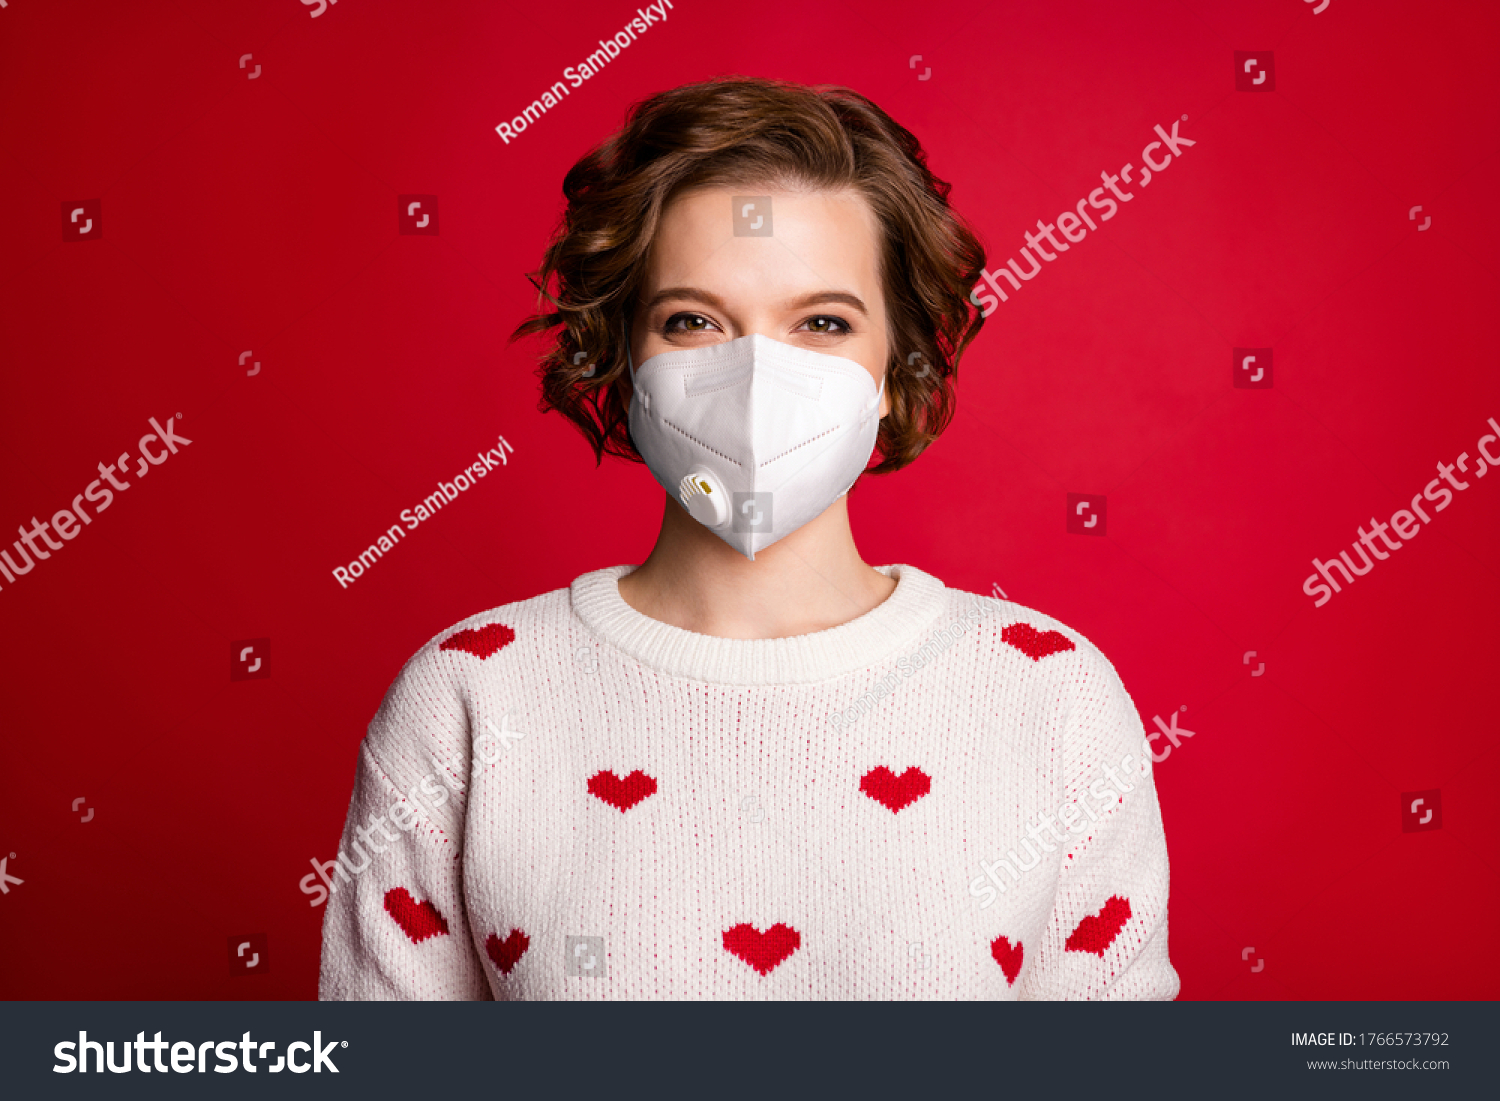 Close-up portrait of content lovely girl wearing safety n95 respirator mask 14-february white sweater with small hearts mers cov preventive measures isolated over vivid color background #1766573792